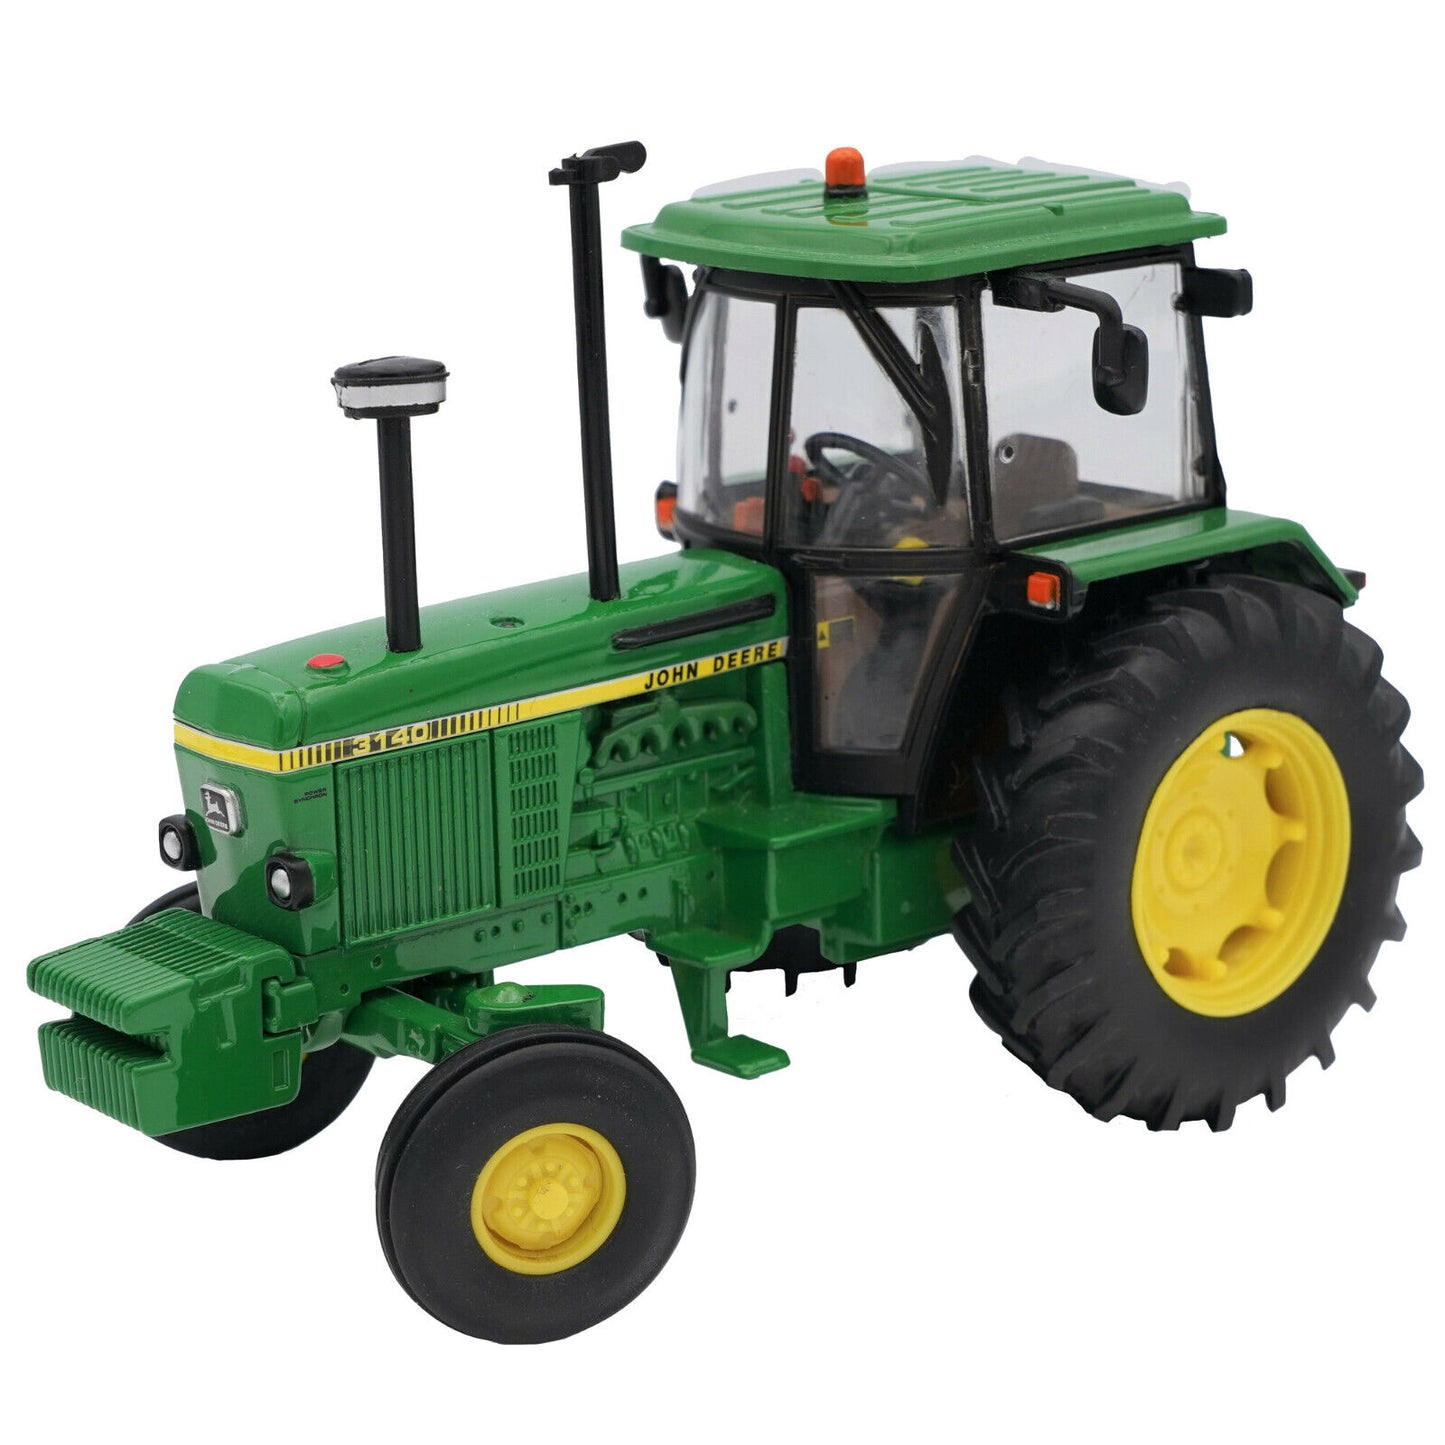 John Deere 3140 2wd Limited Edition